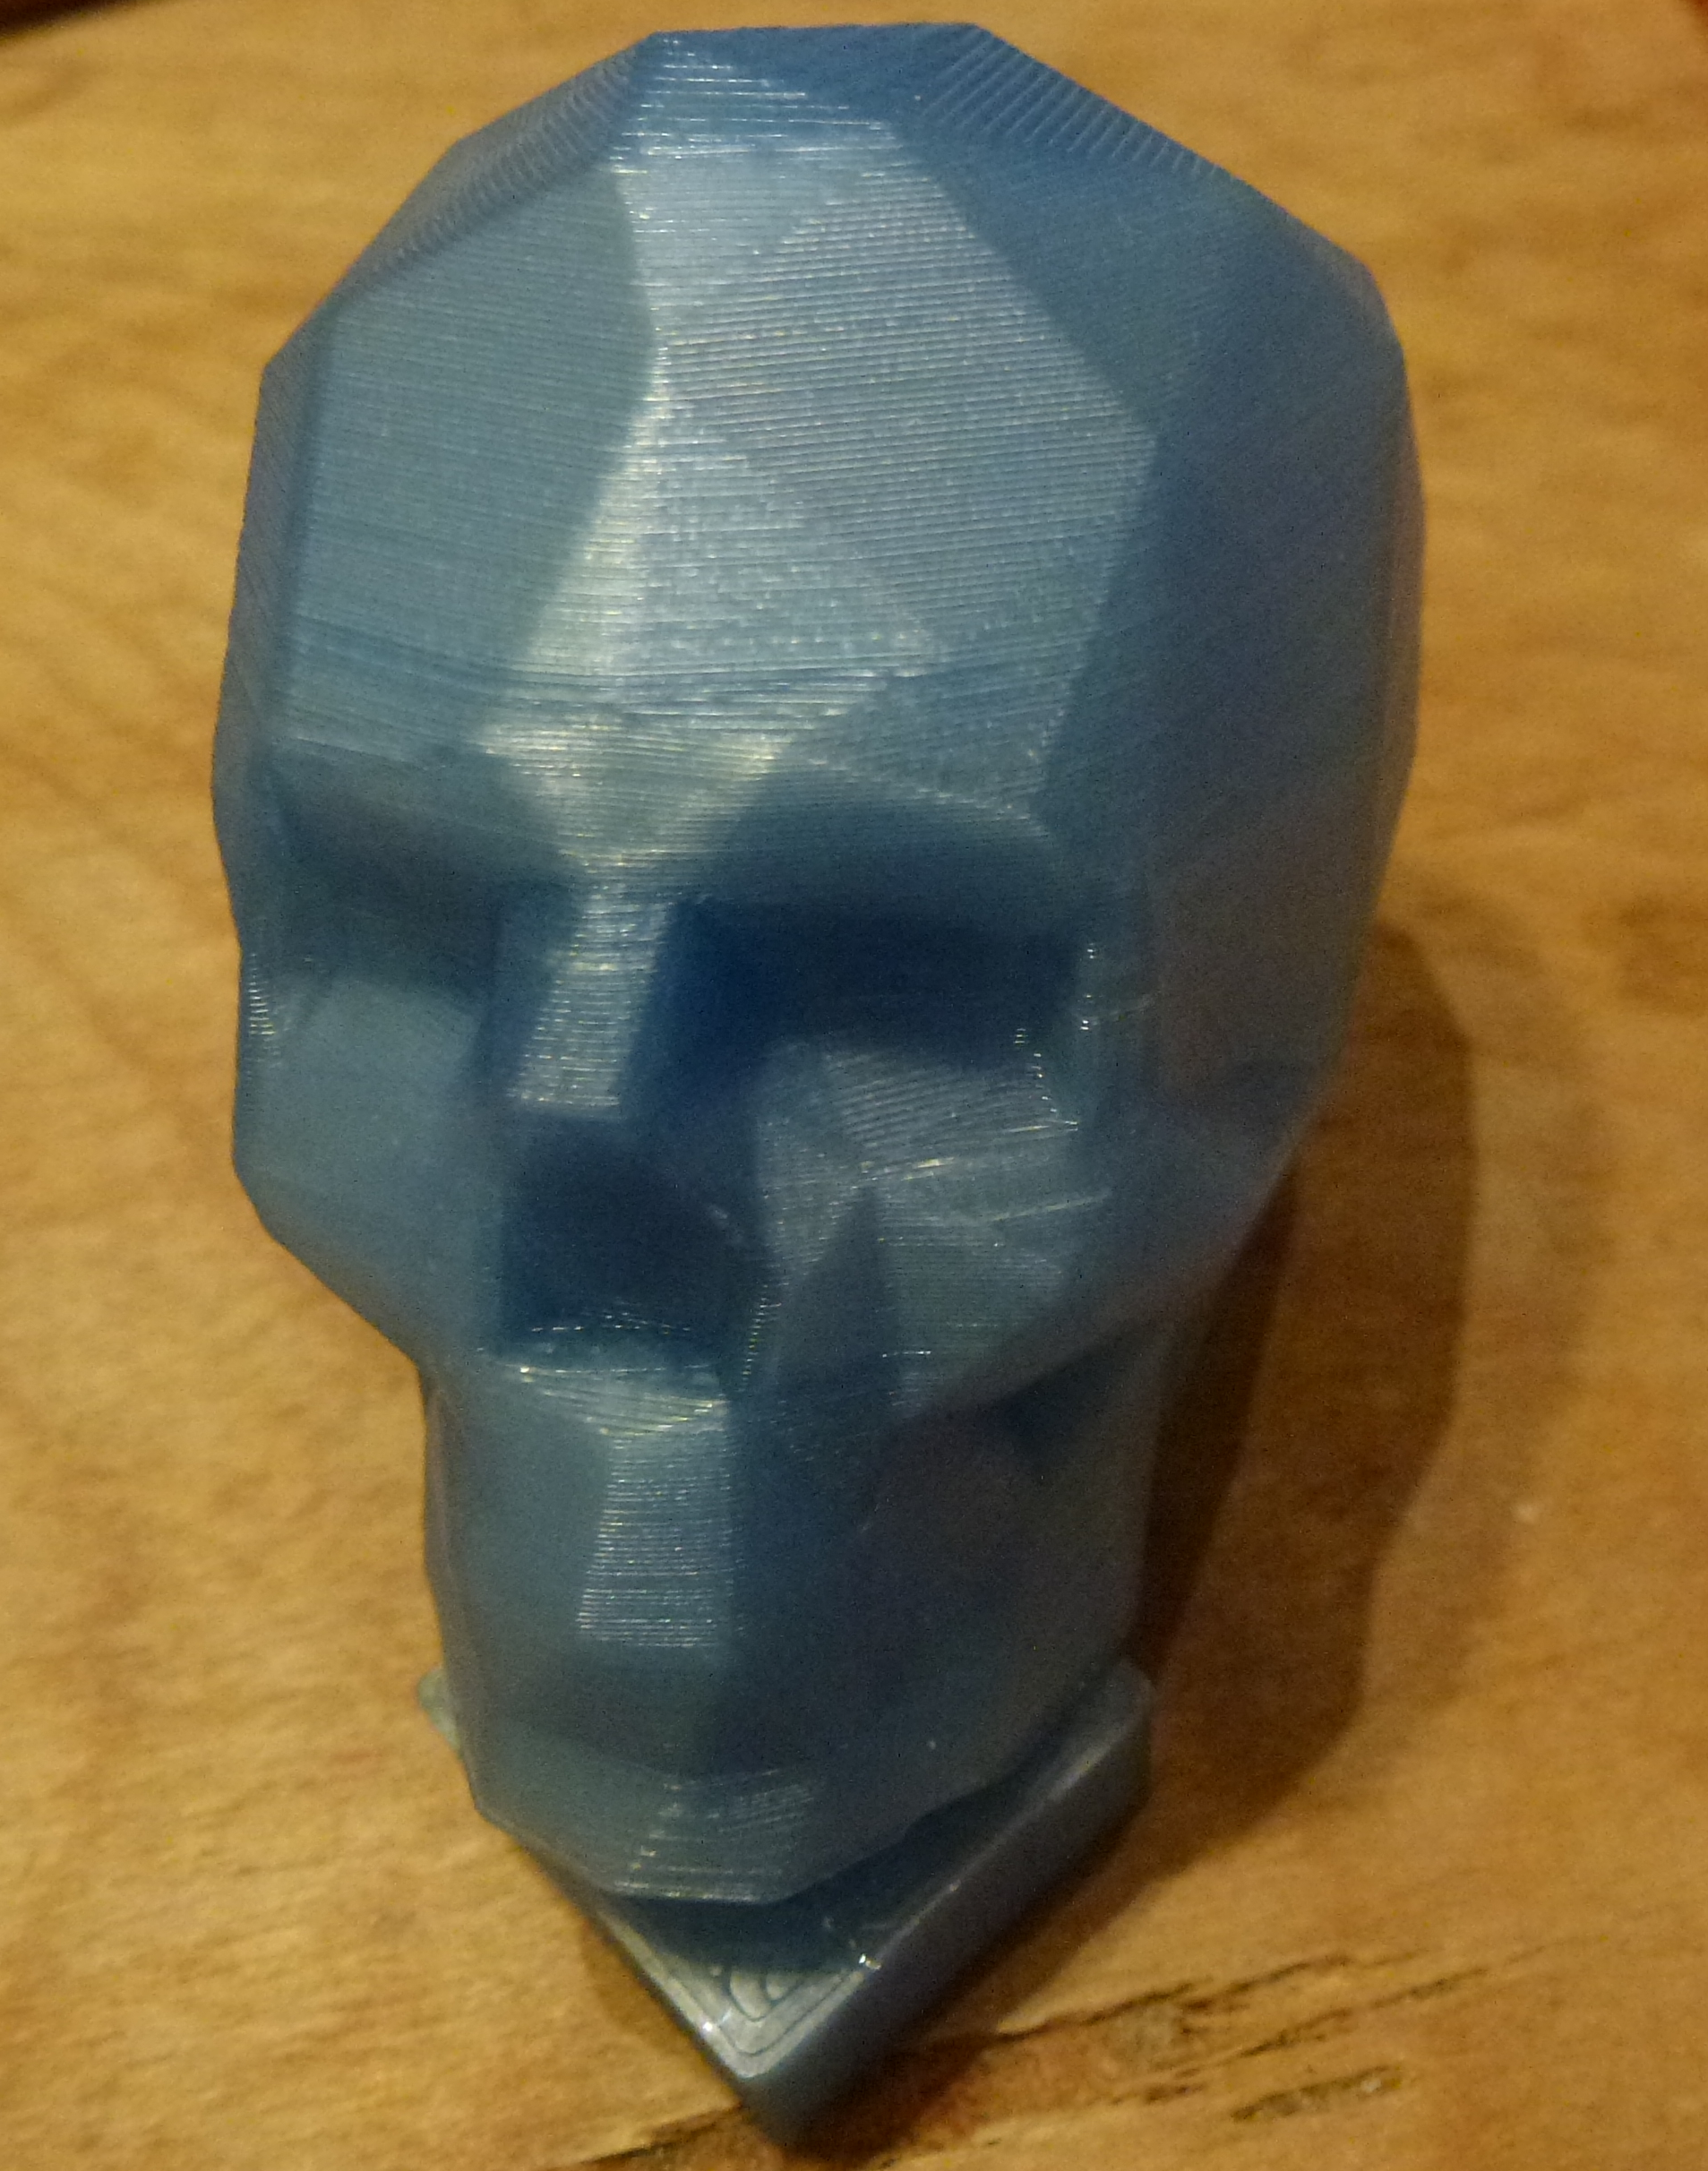 Hollow low-poly skull